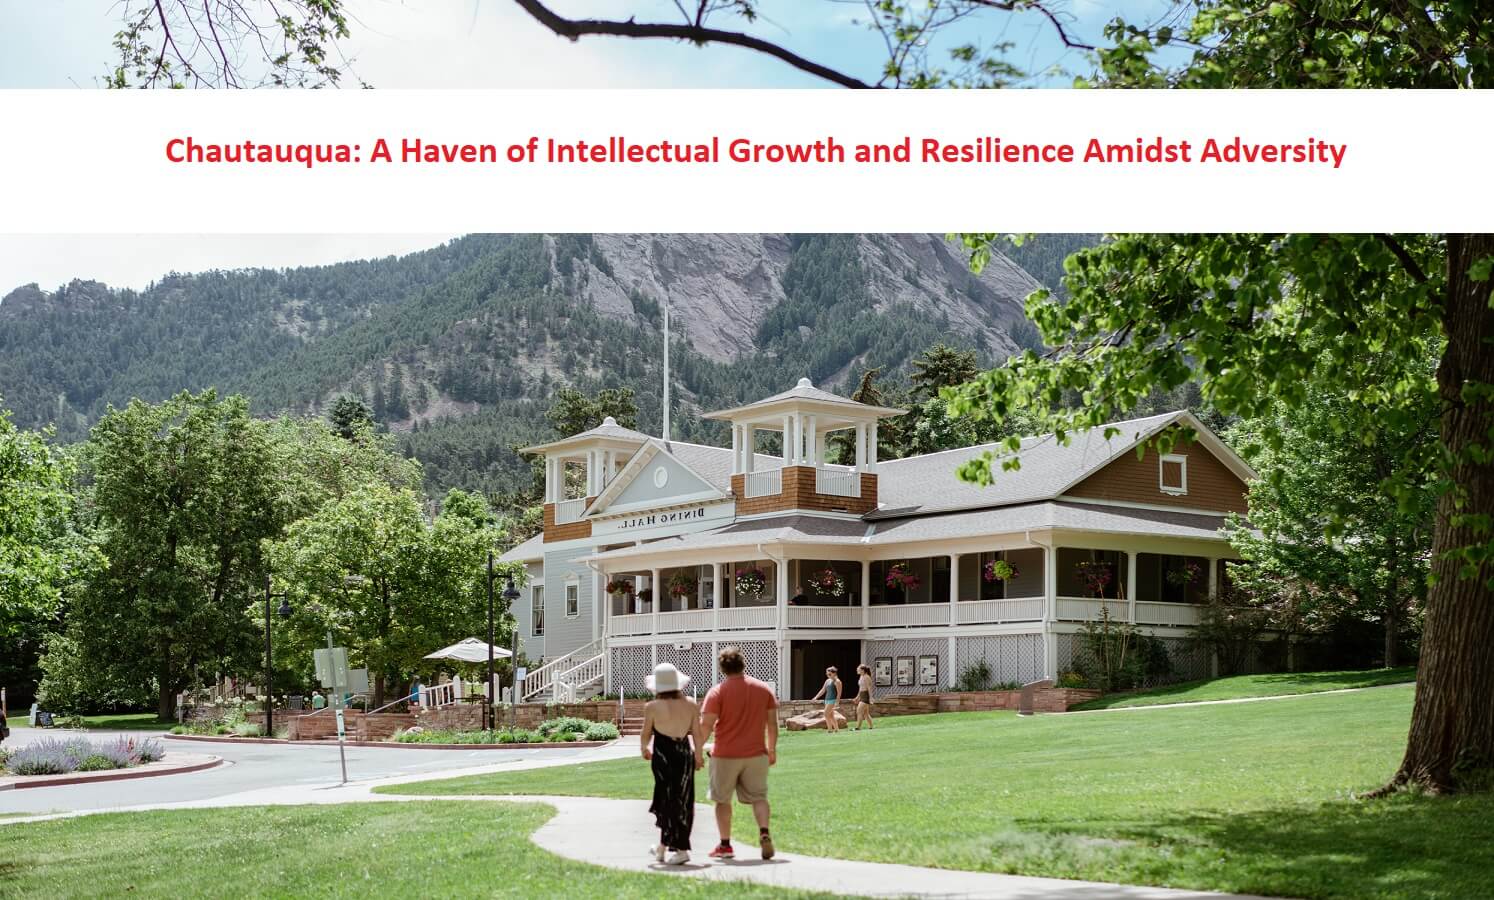 Chautauqua: A Haven of Intellectual Growth and Resilience Amidst Adversity